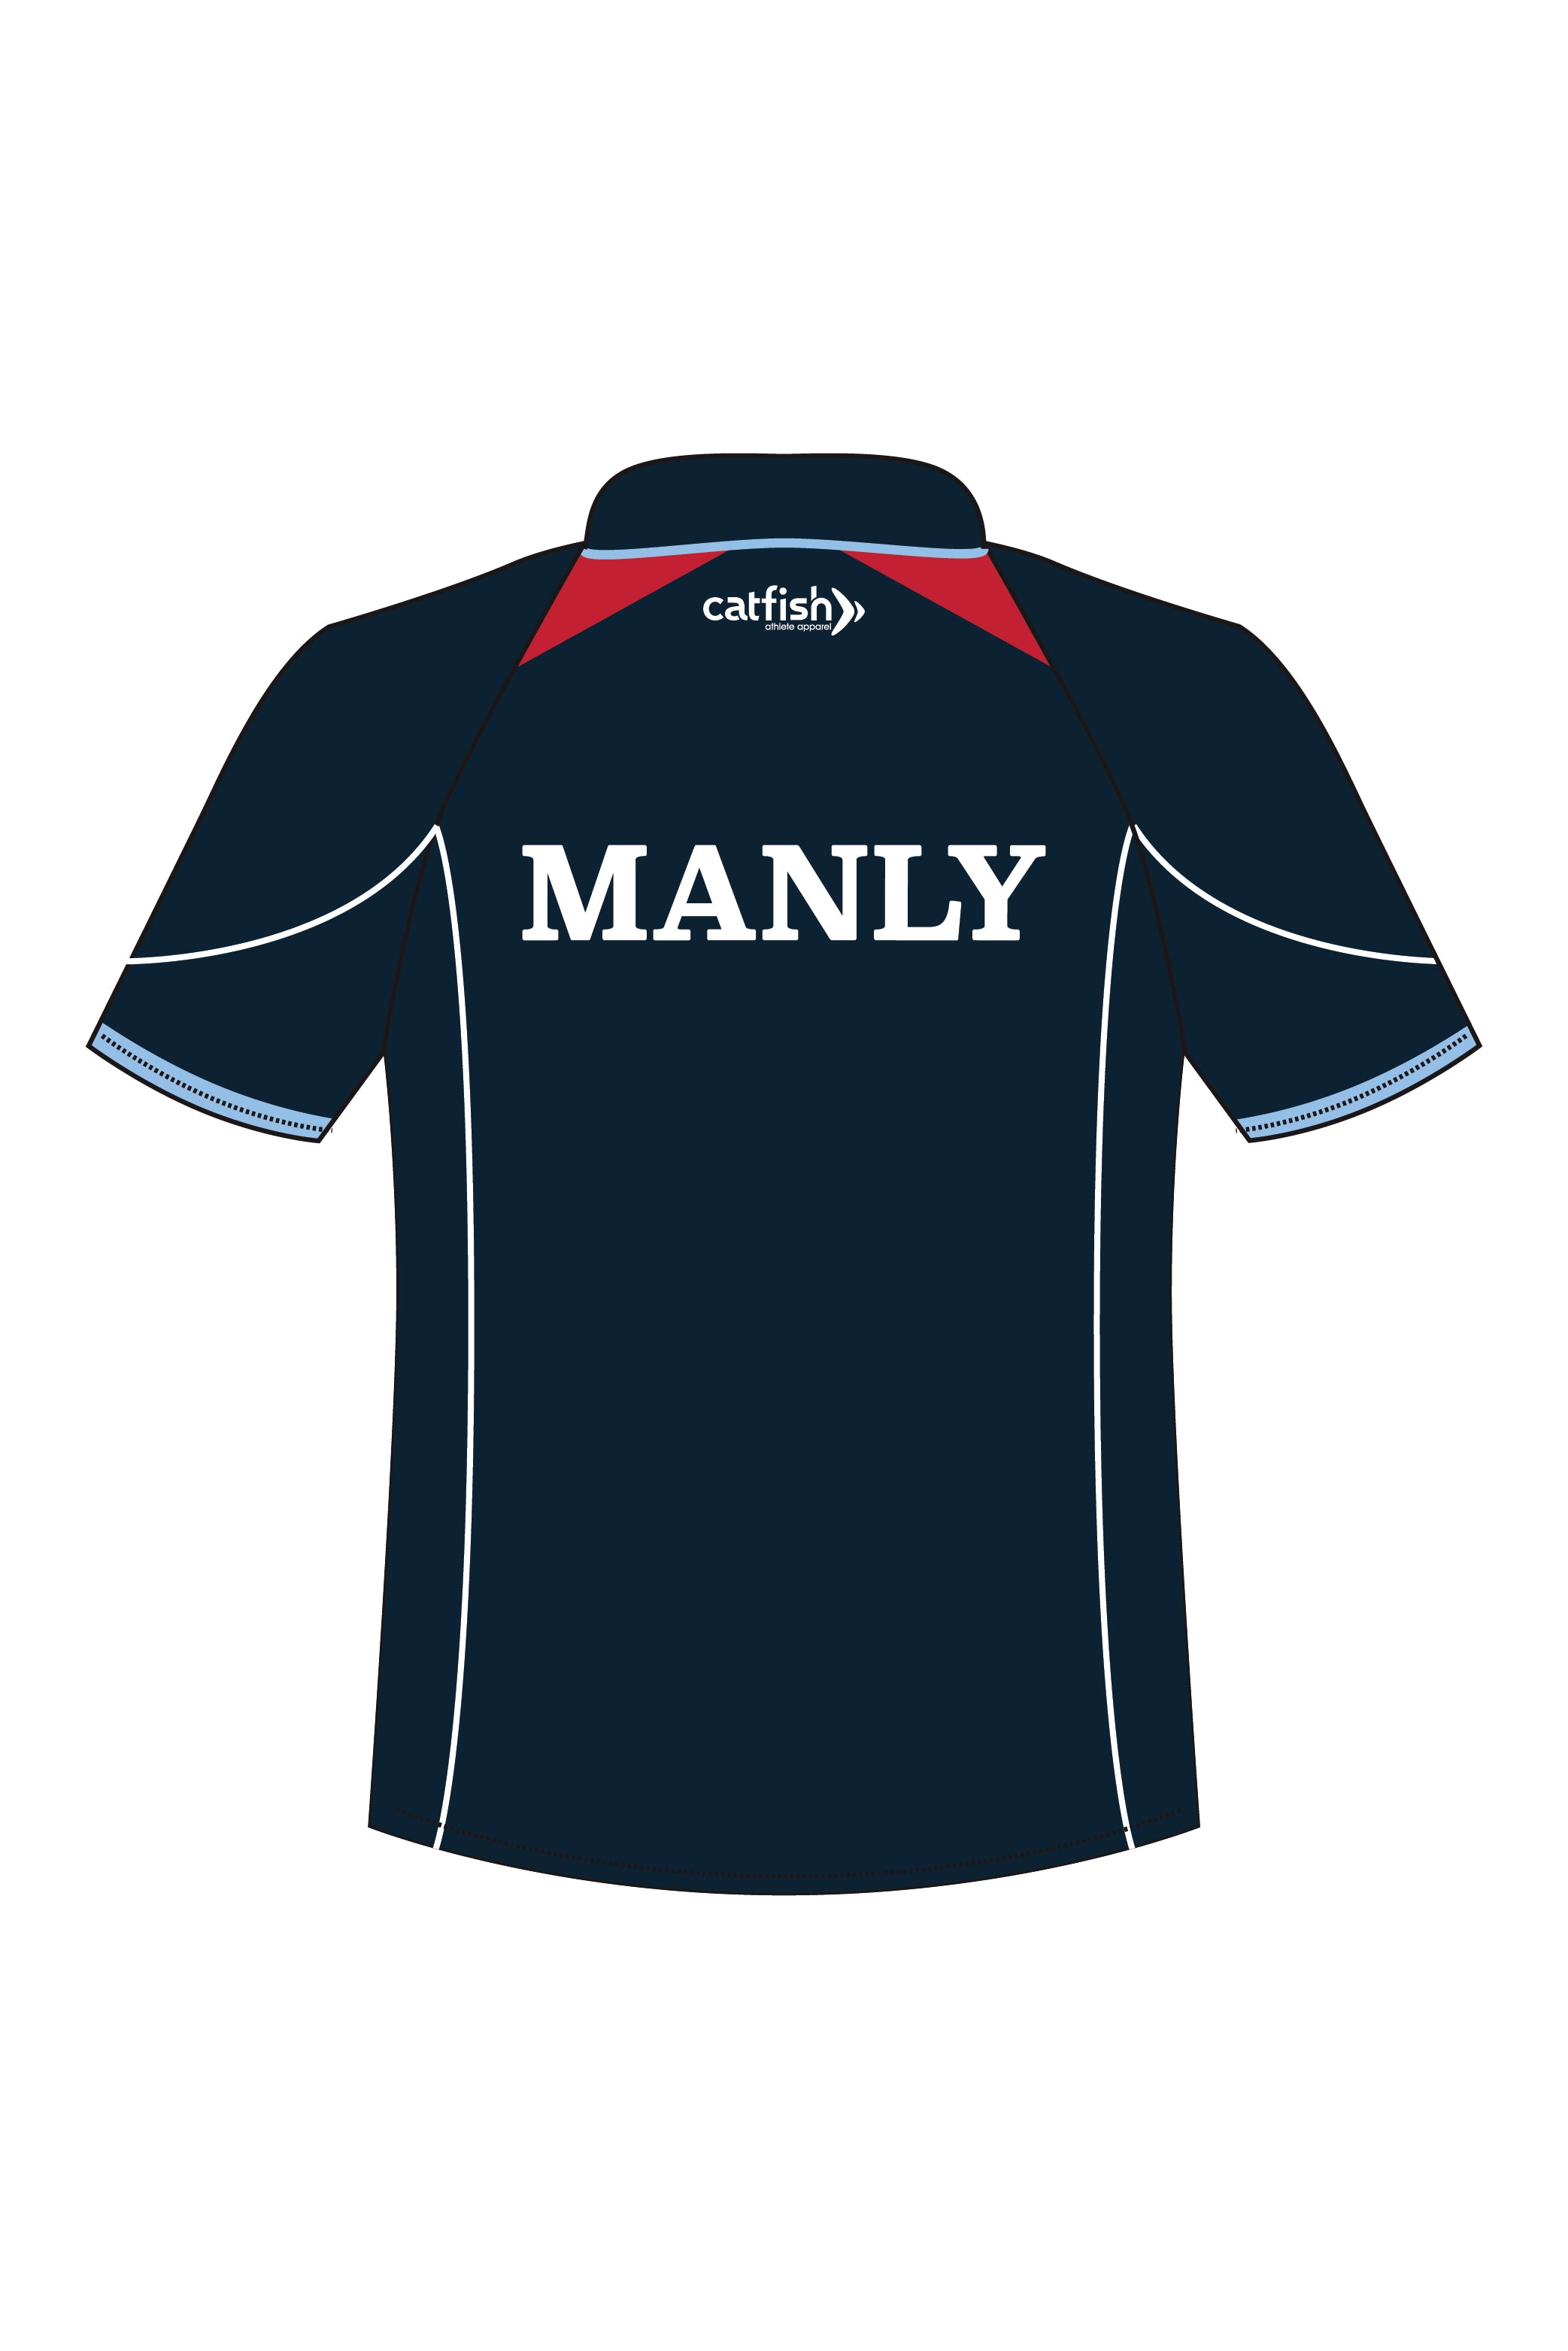 Manly Swimming Club Kid's Polo